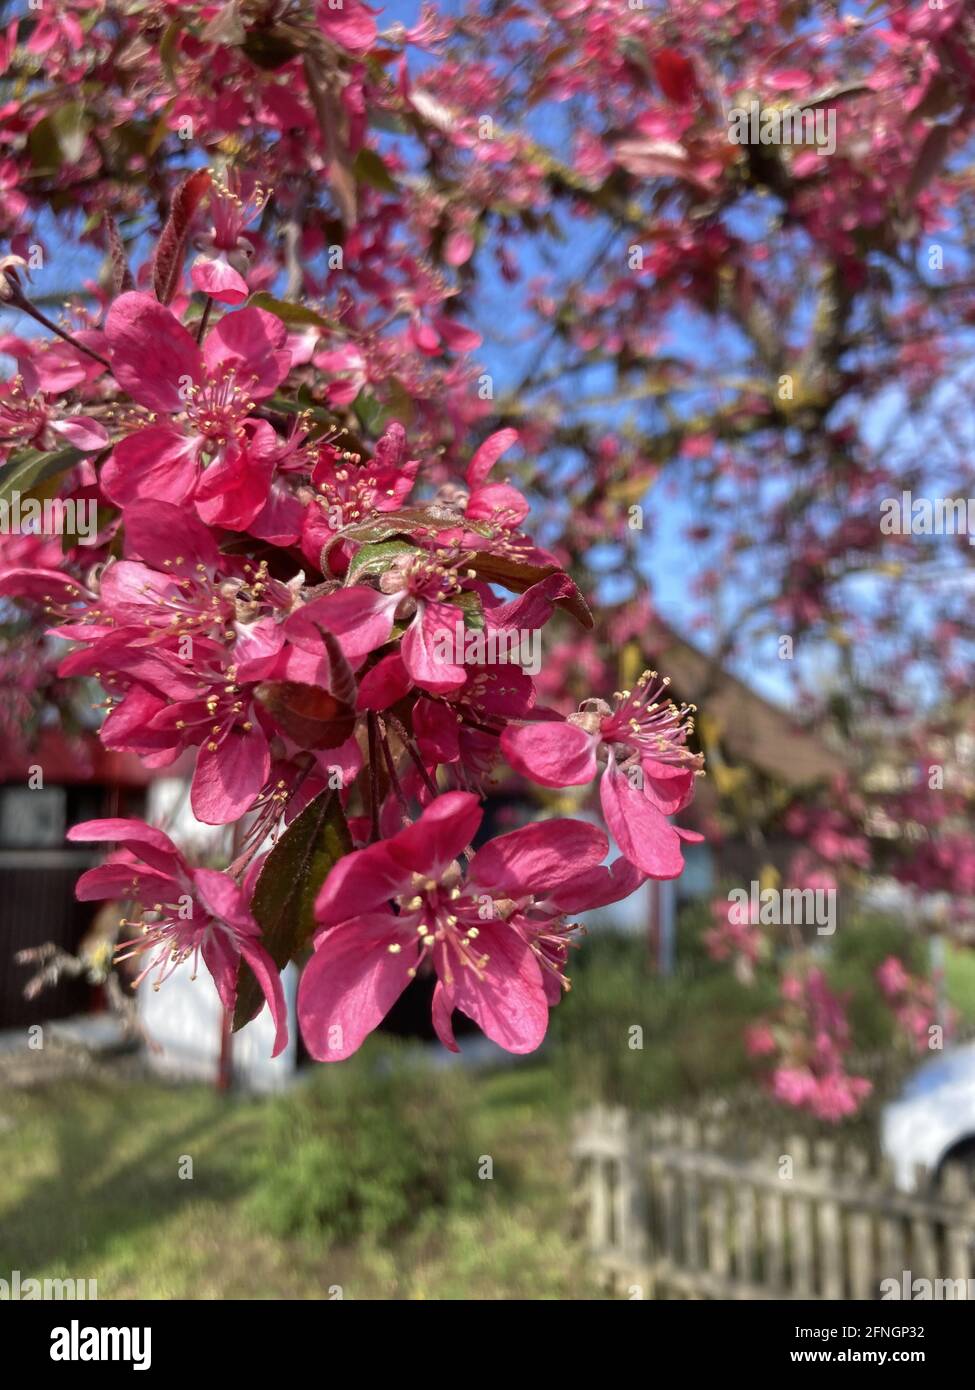 Closeup shot of pink blossom flowers on a Niedzwetzky's apple tree Stock Photo